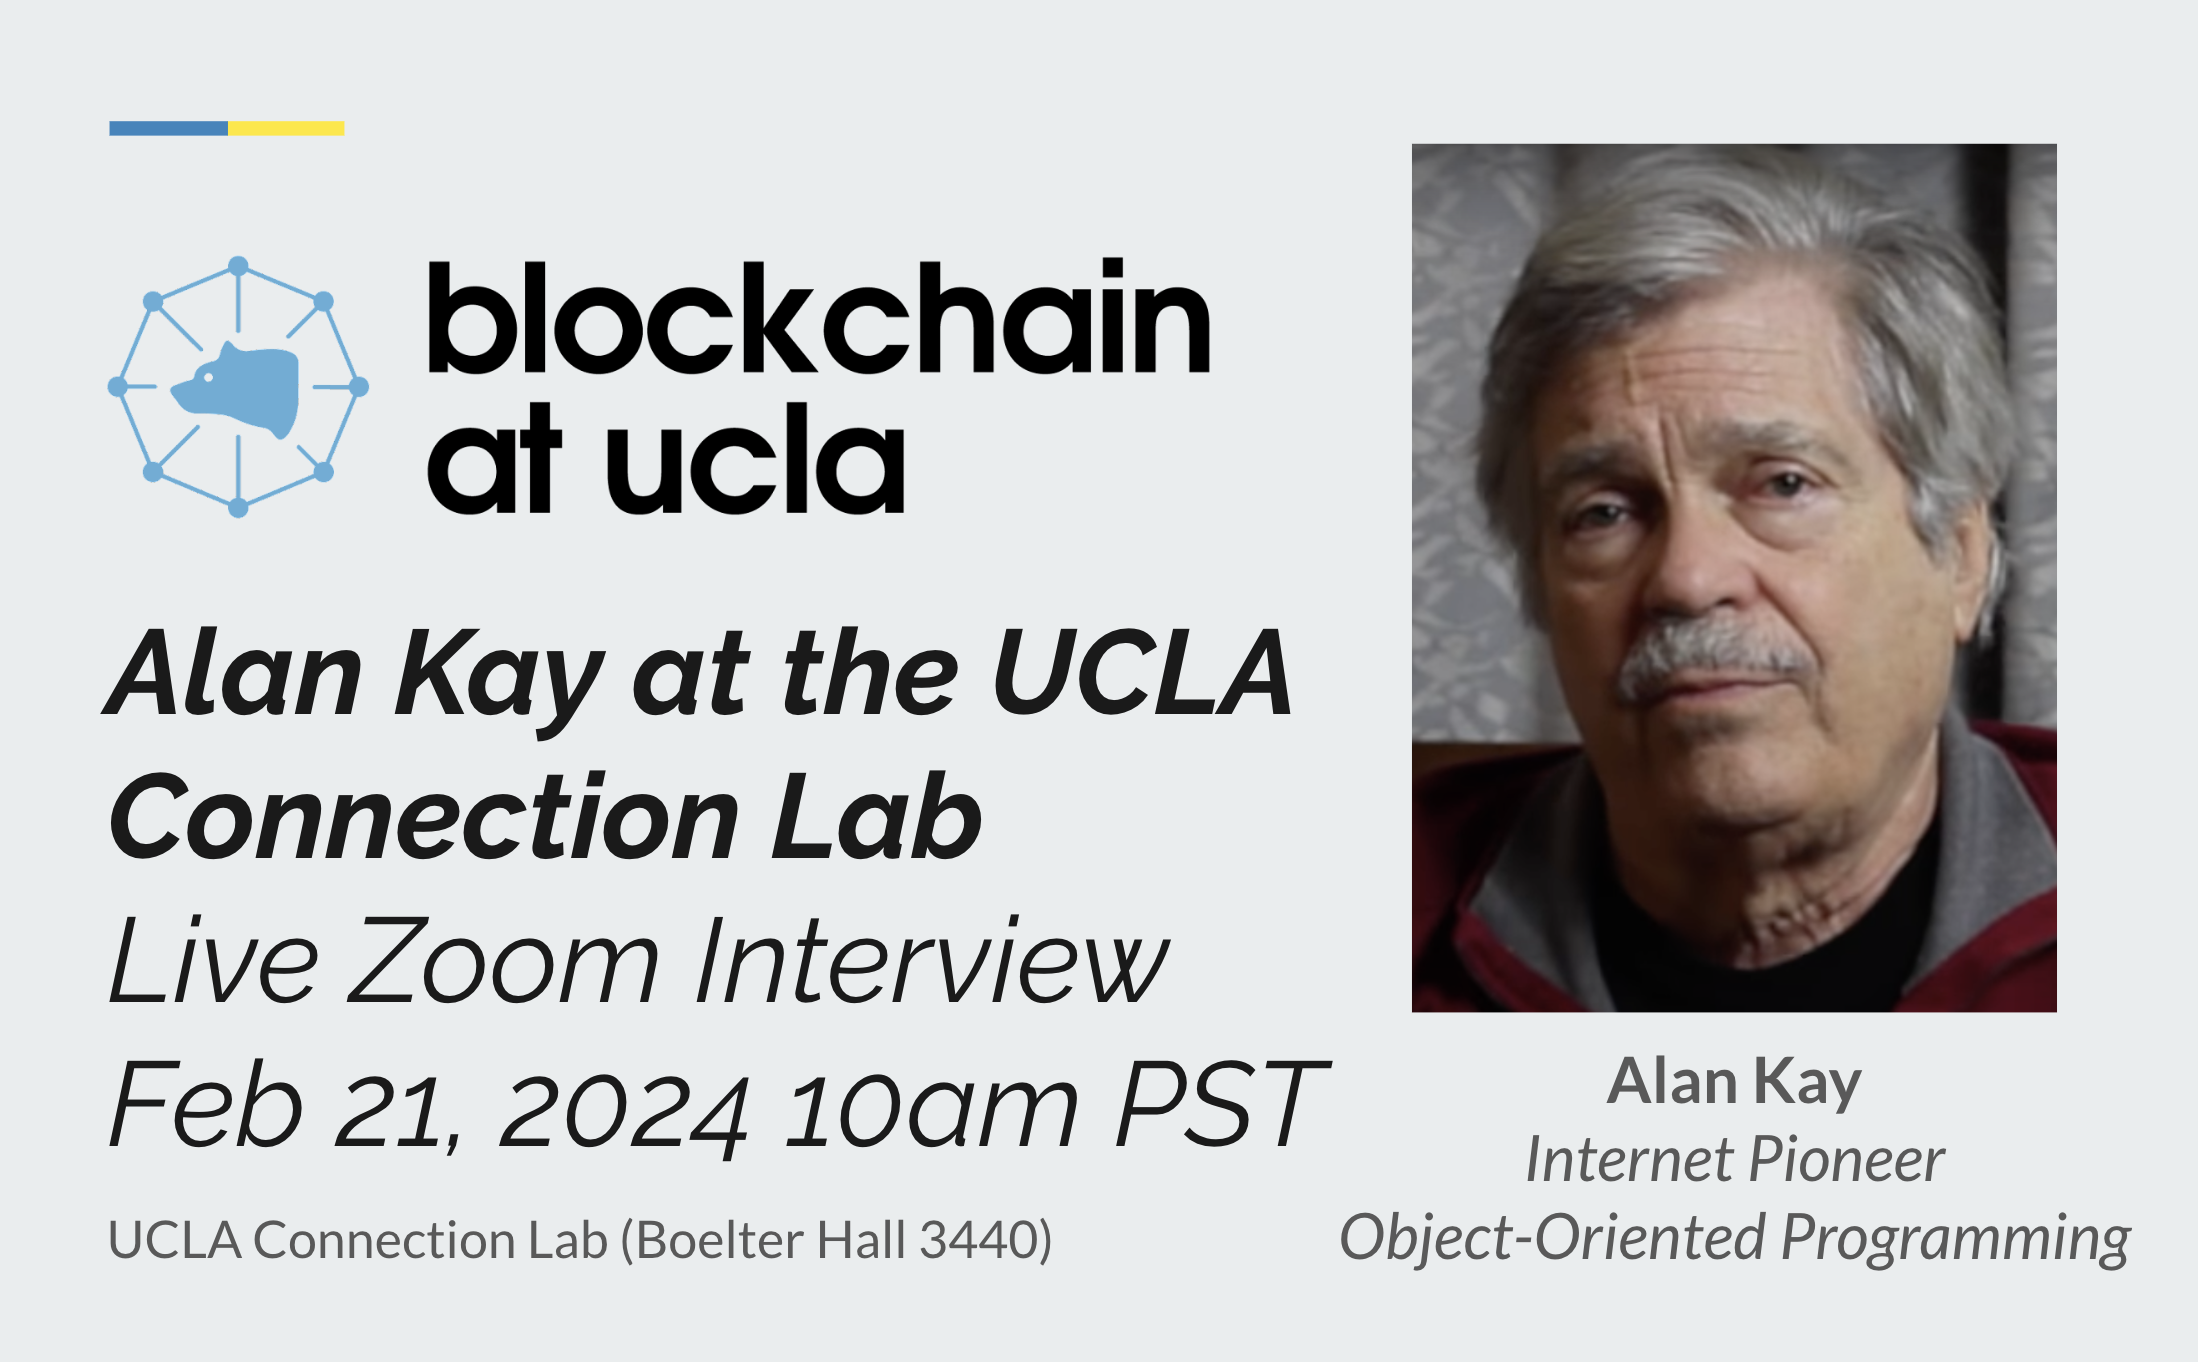 Alan Kay at the UCLA Connection Lab